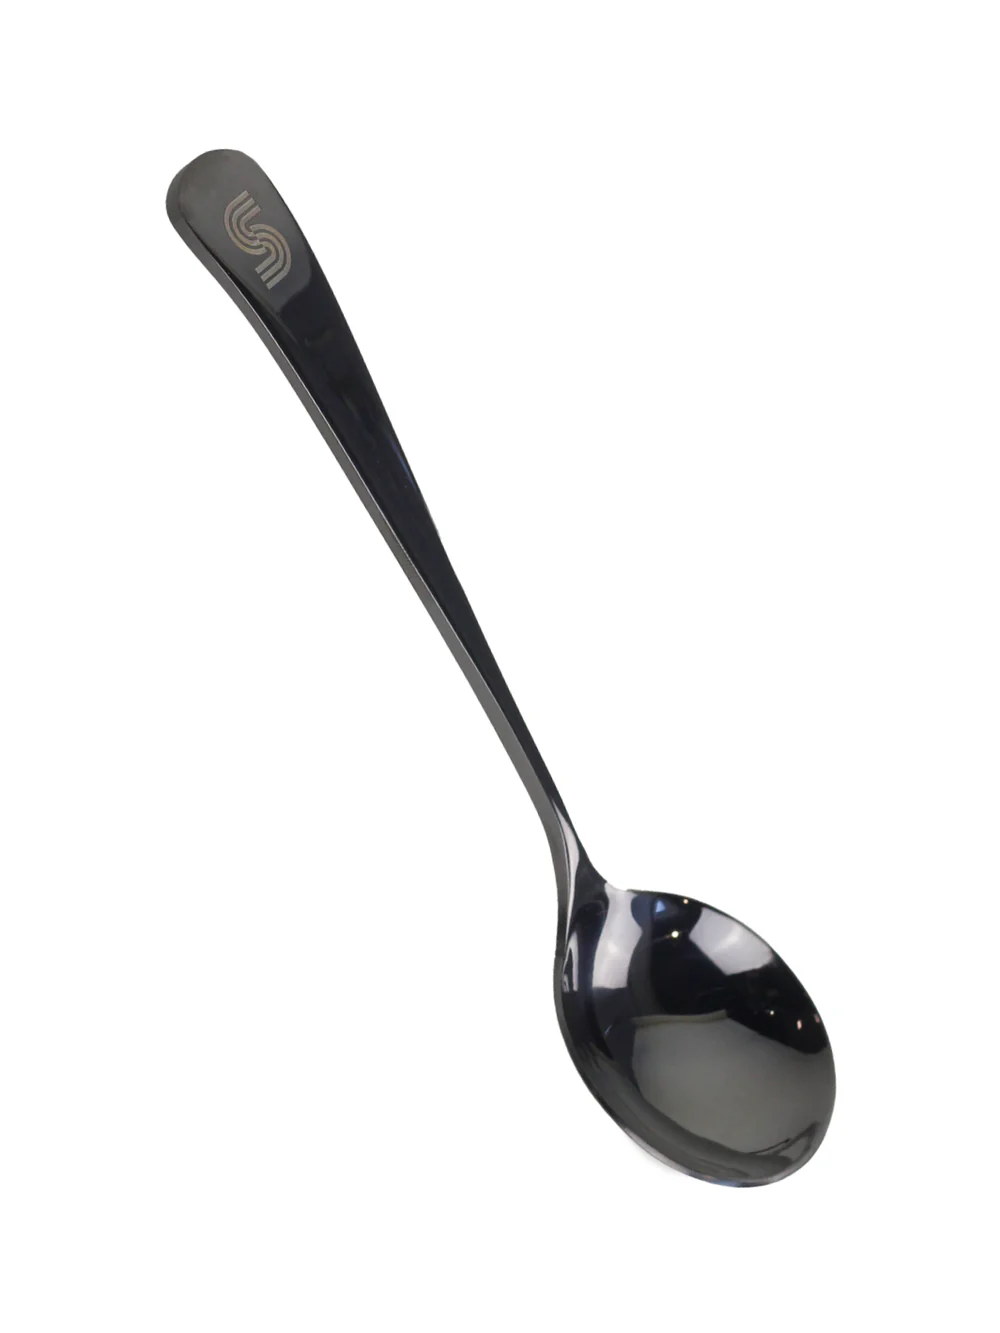 Supergood Cupping Spoon (Black)